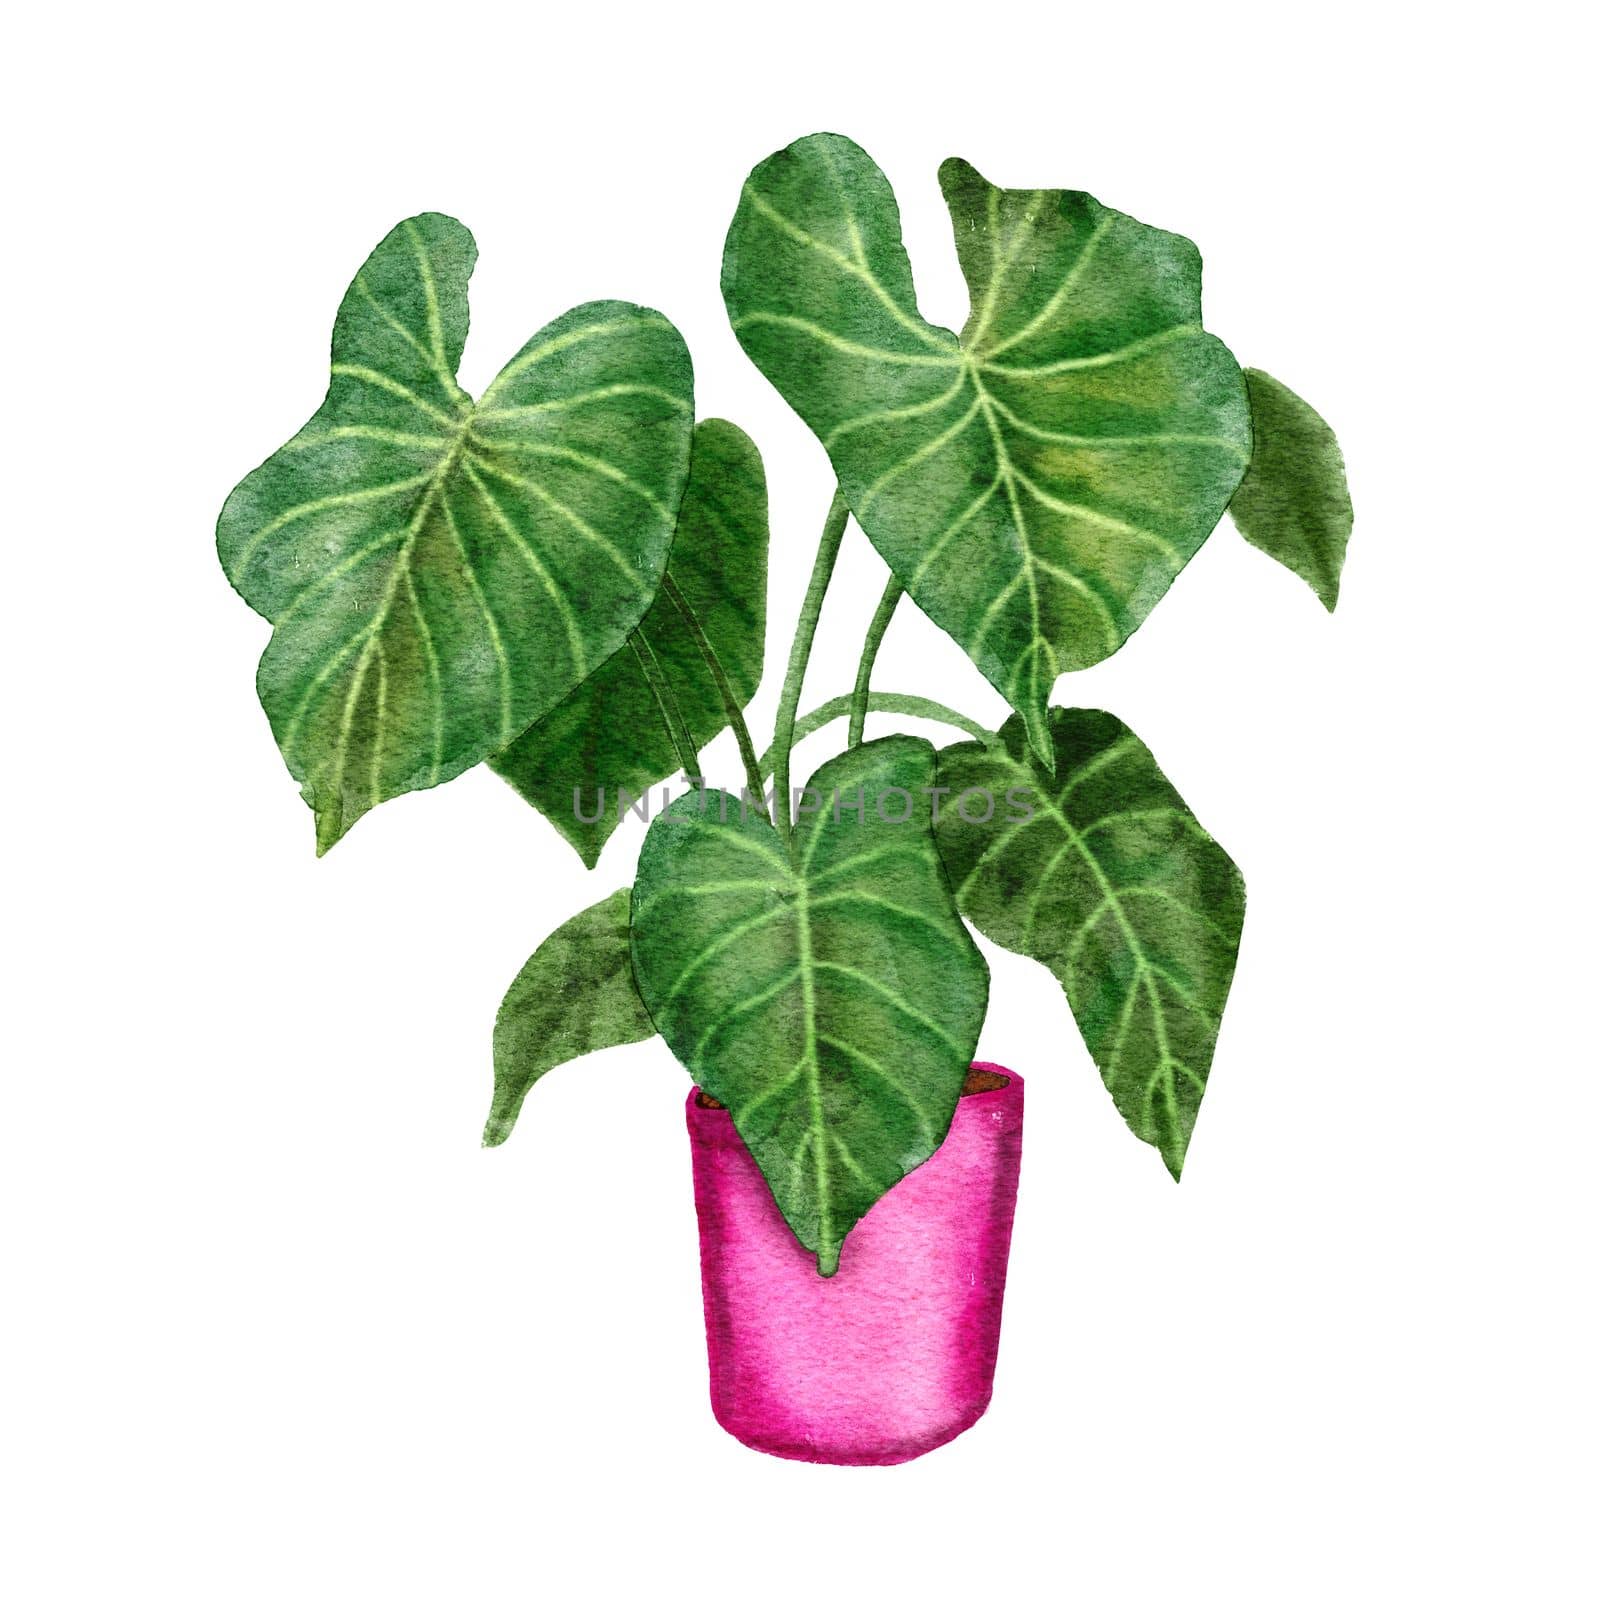 Hand drawn watercolor illustration of philodendron gloriosim houseplant, green leaves pink pot plant flower, tropical foliage leaves, expensive variety. Urban jungle nature lovers species herb